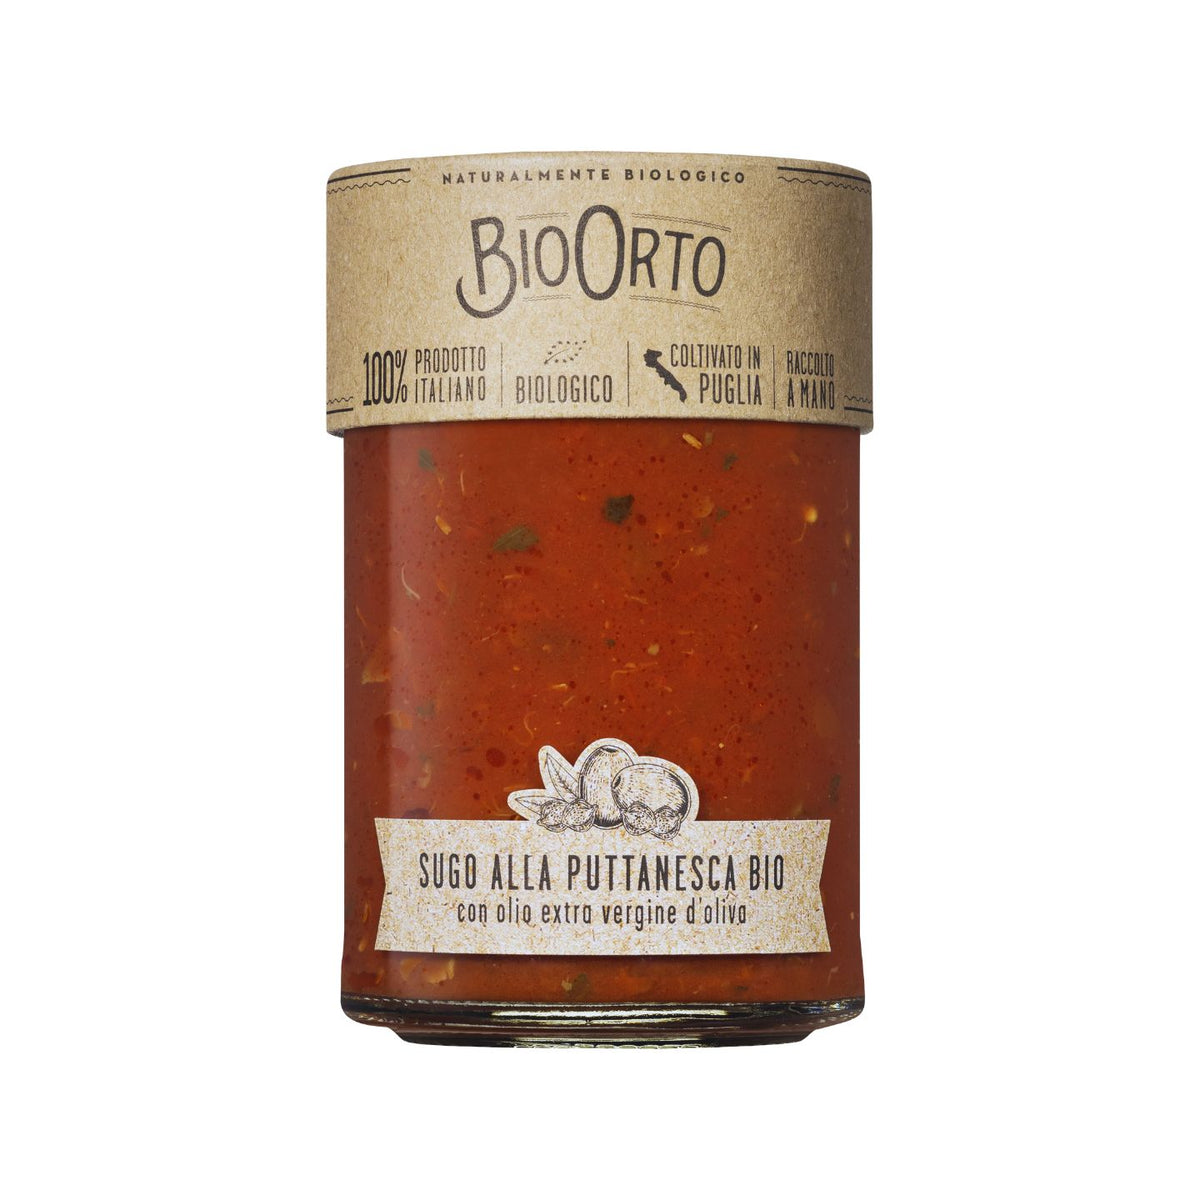 Bio Orto Organic Puttanesca Pasta Sauce 350g  | Imported and distributed in the UK by Just Gourmet Foods